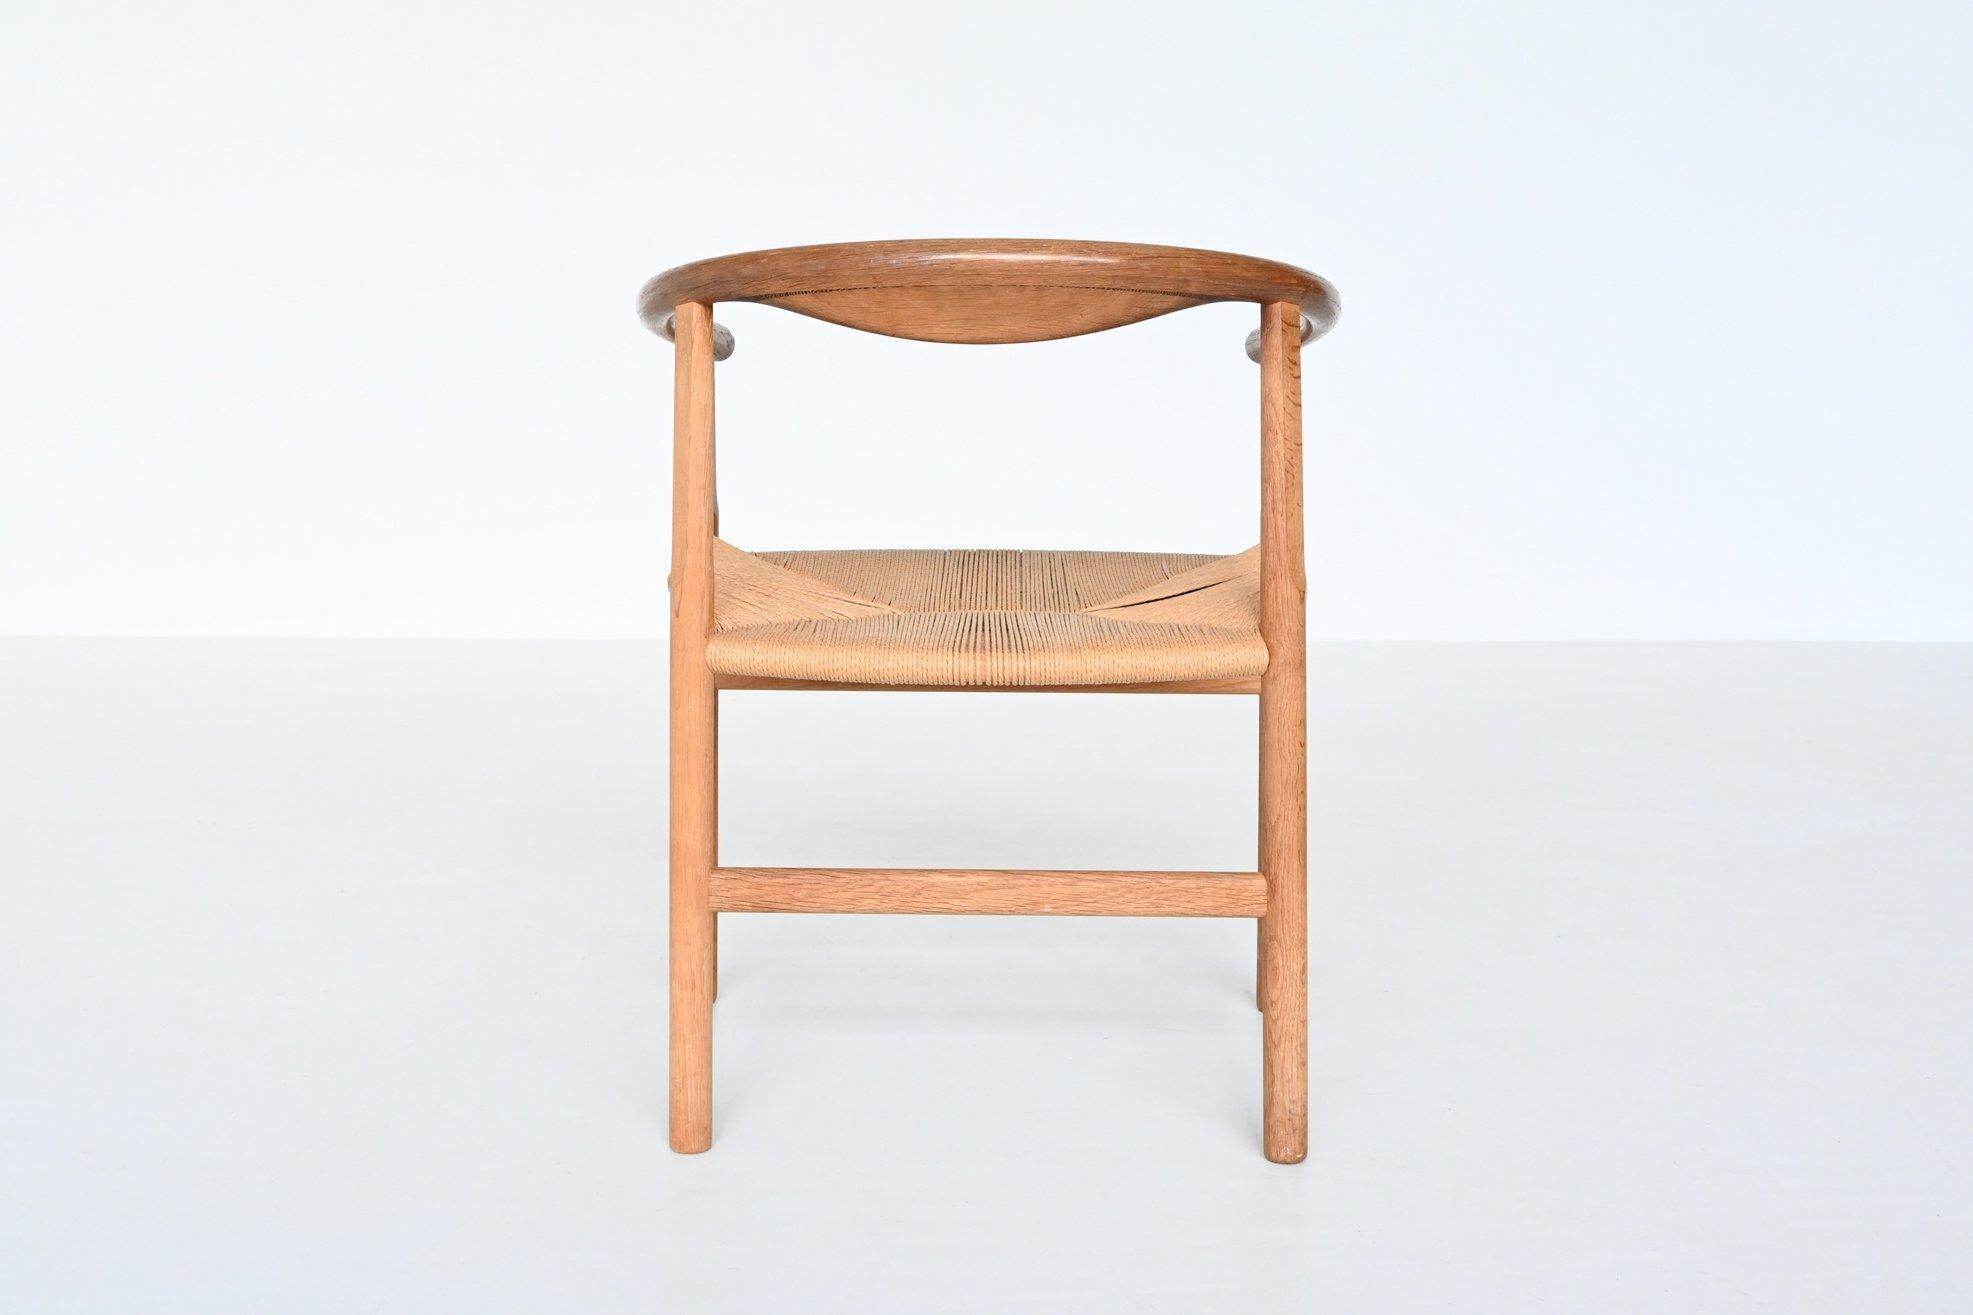 Beautiful shaped dining chair designed by Hans J. Wegner and manufactured by PP Møbler, Denmark 1969. This is chair is an early example in very nice original condition. The chair is made of solid oak wood and has a paper cord seat. It has many